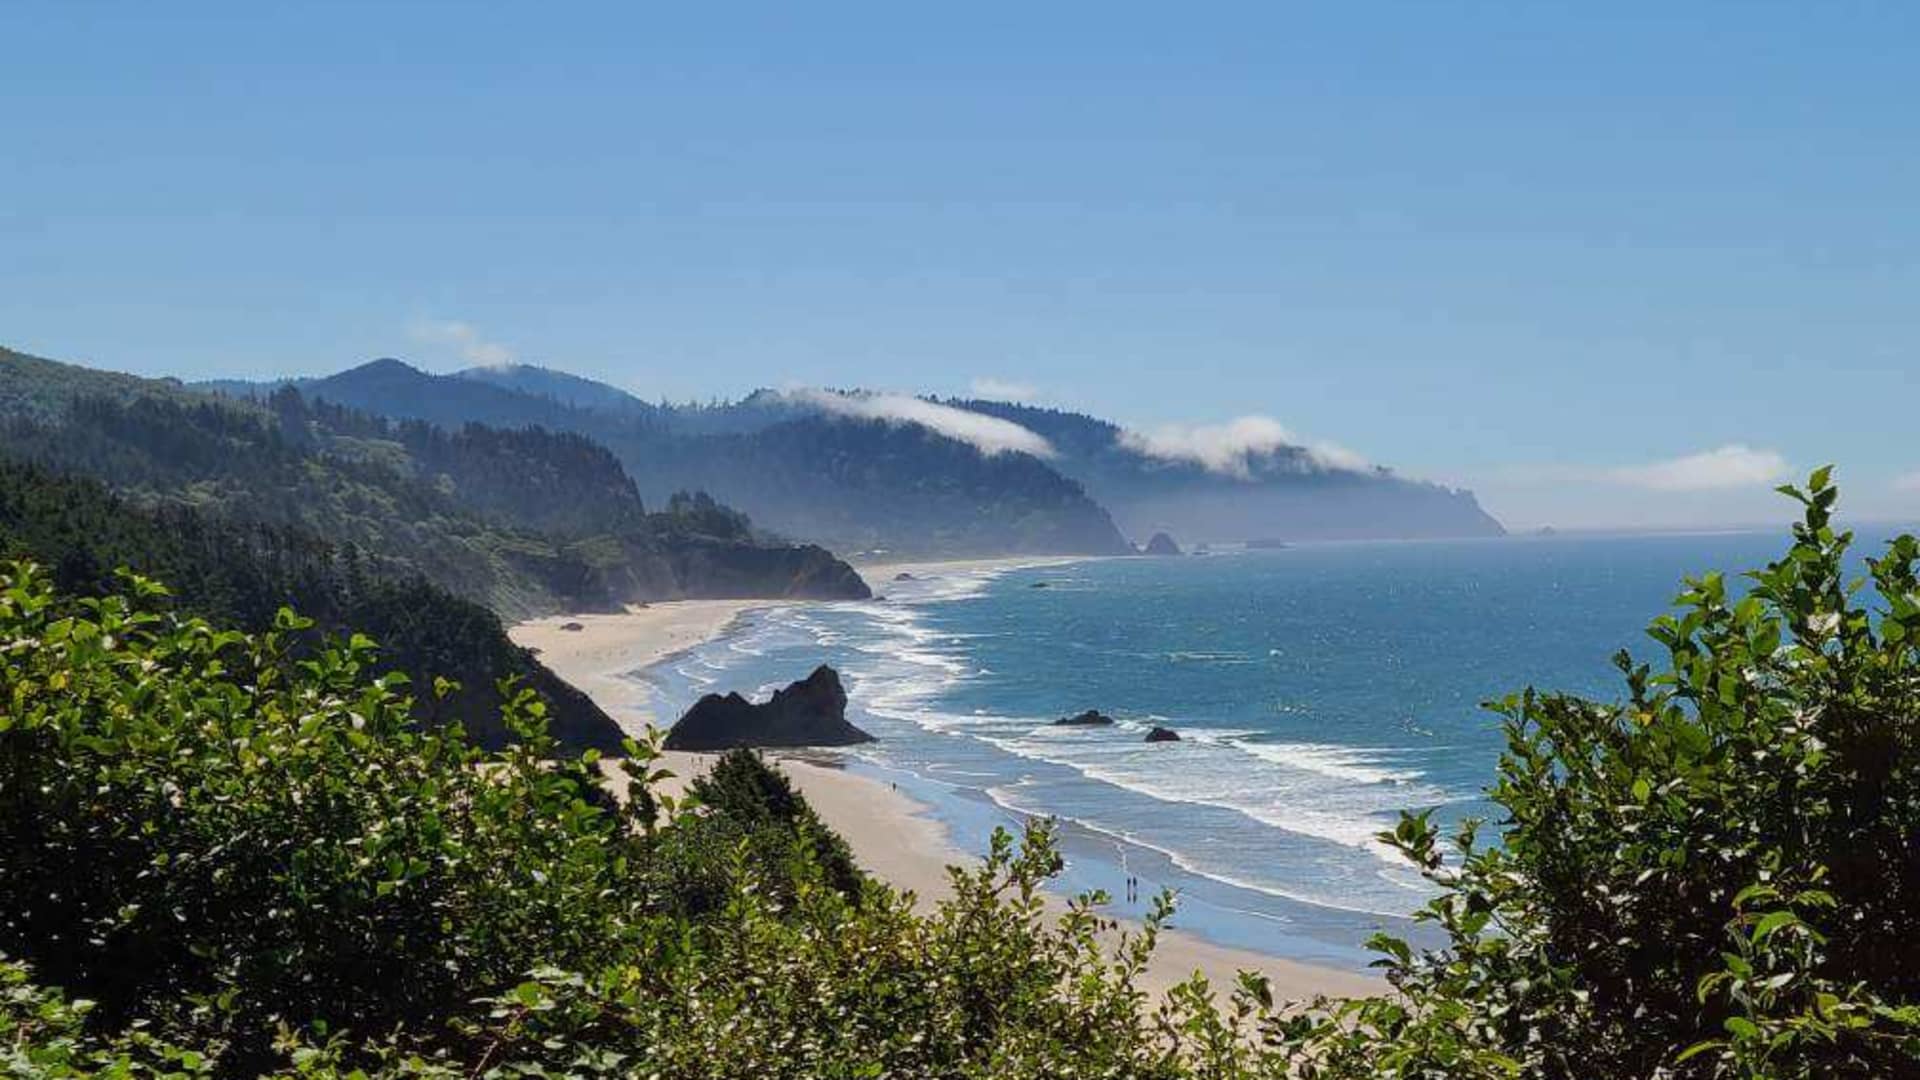 Andrew snapped this photo passing Cannon Beach in Oregon